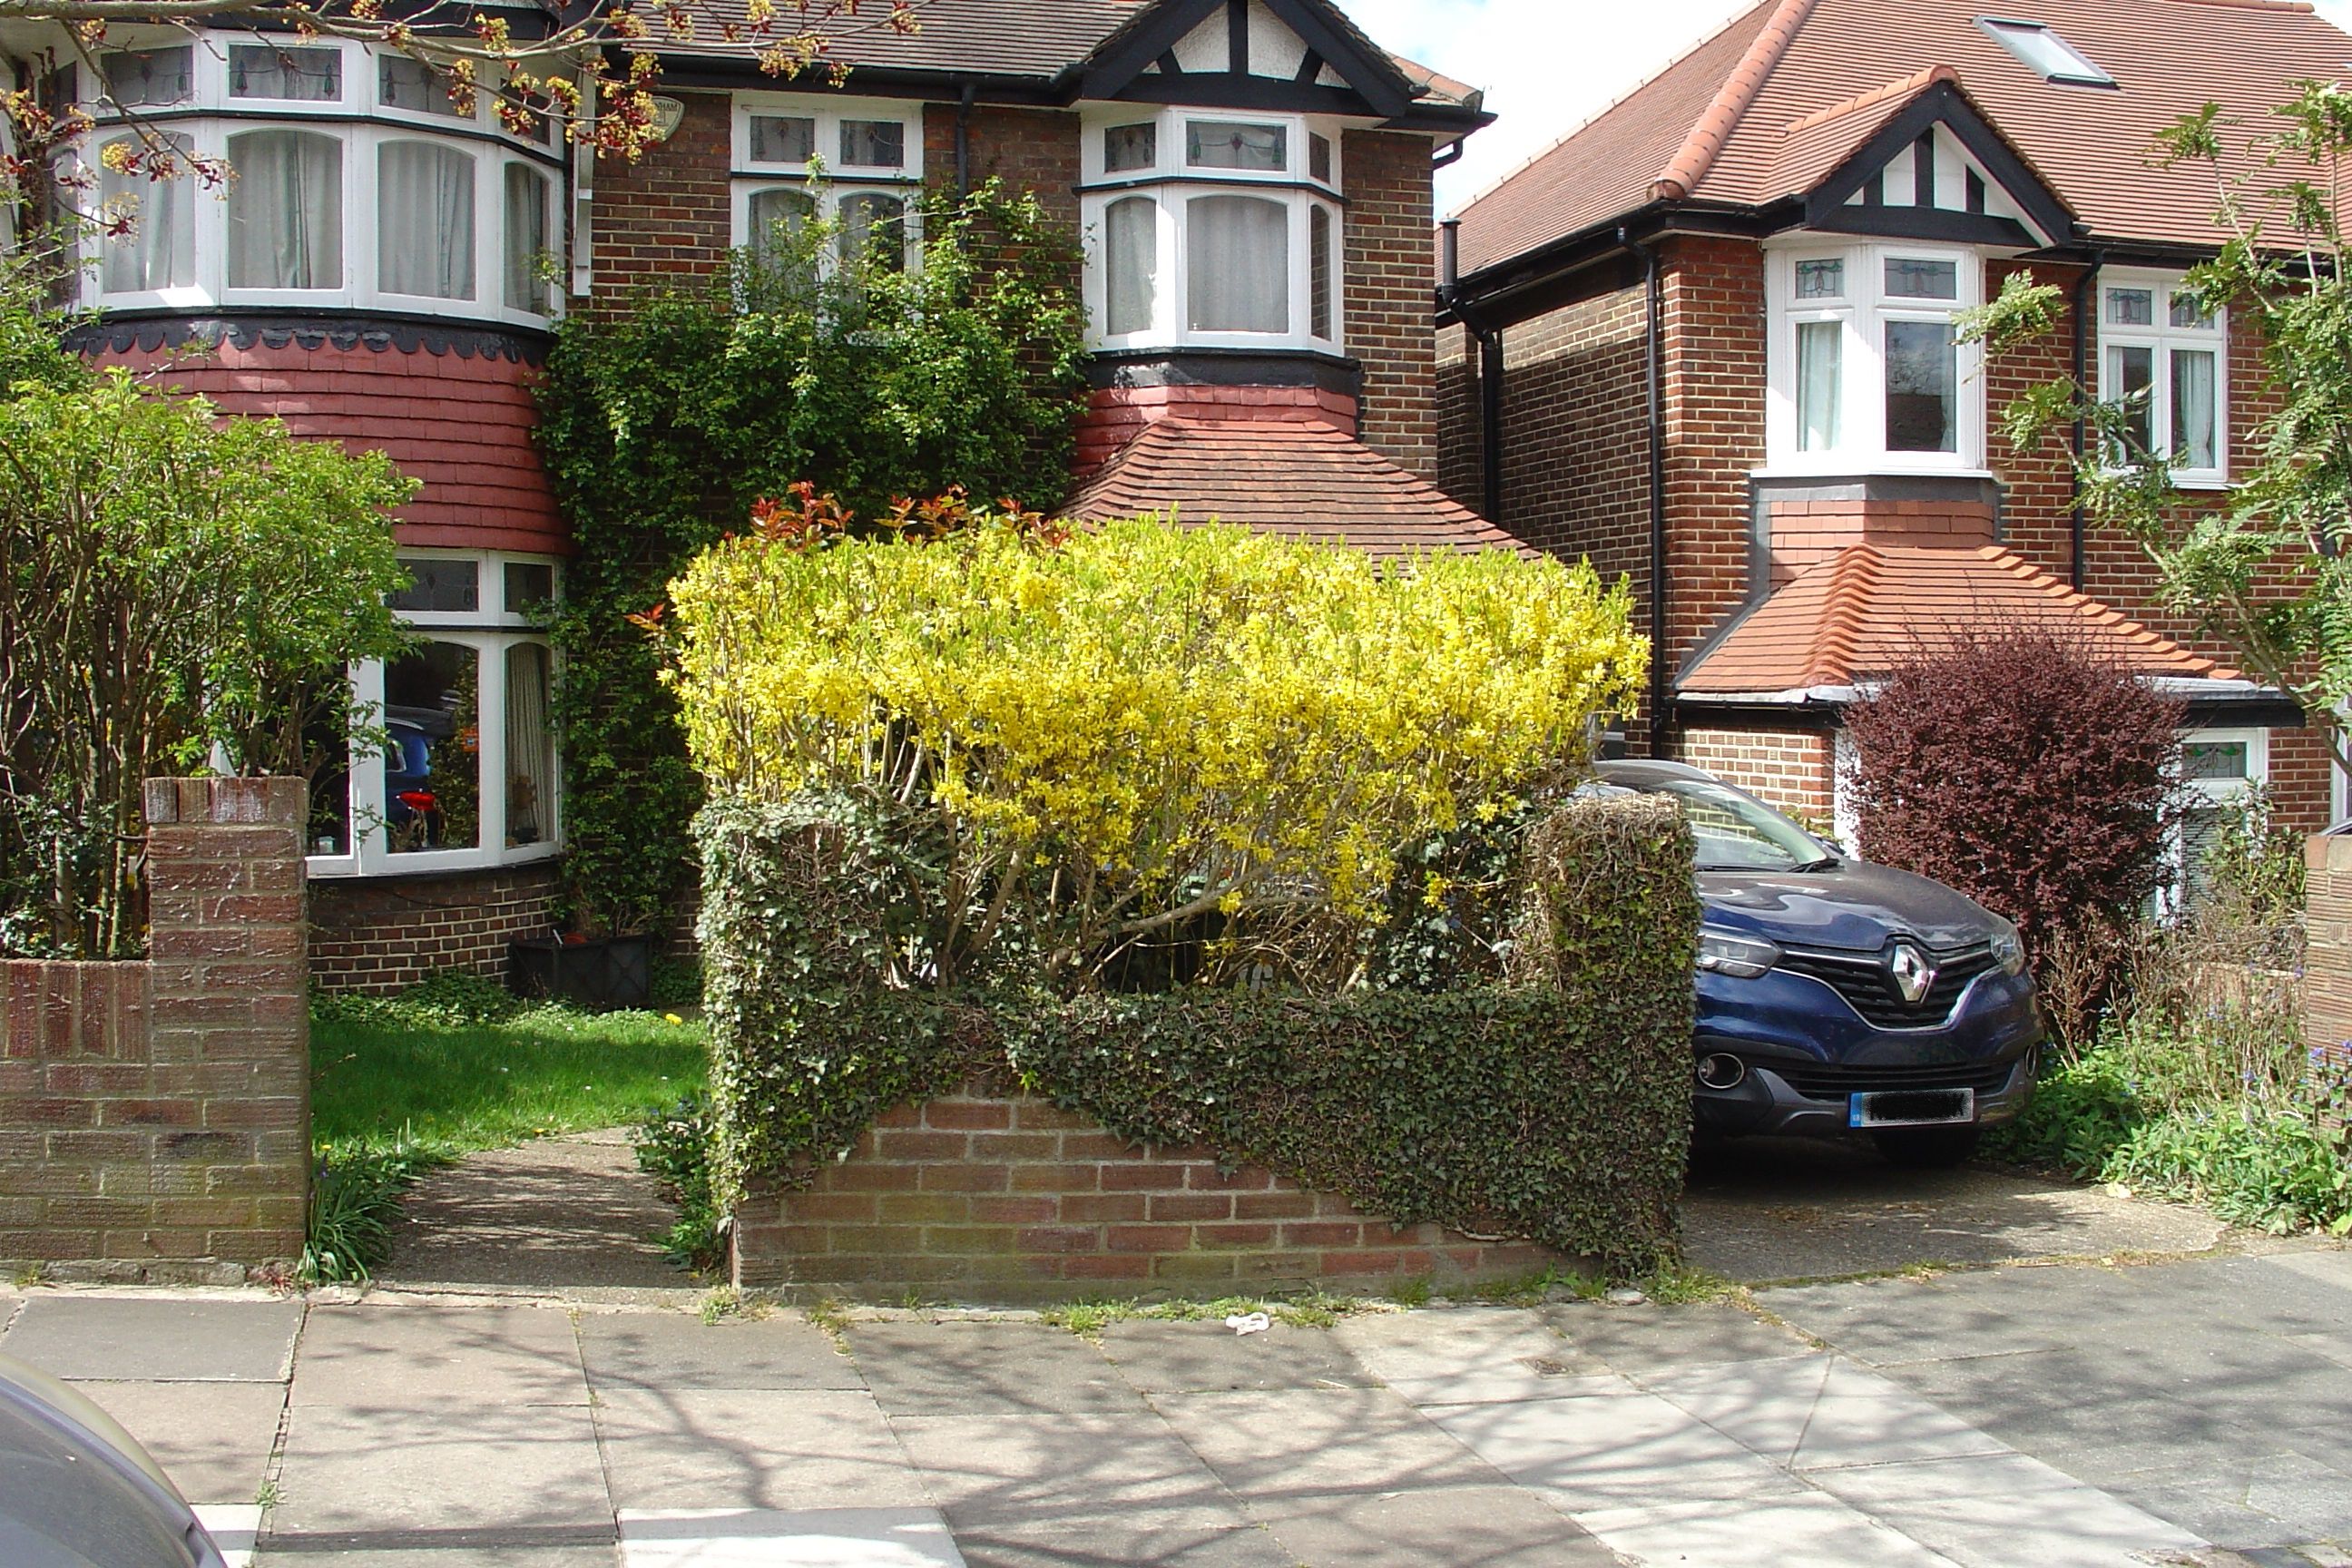 Photo of Forsythia creating a hedge together with an ivy-covered wall